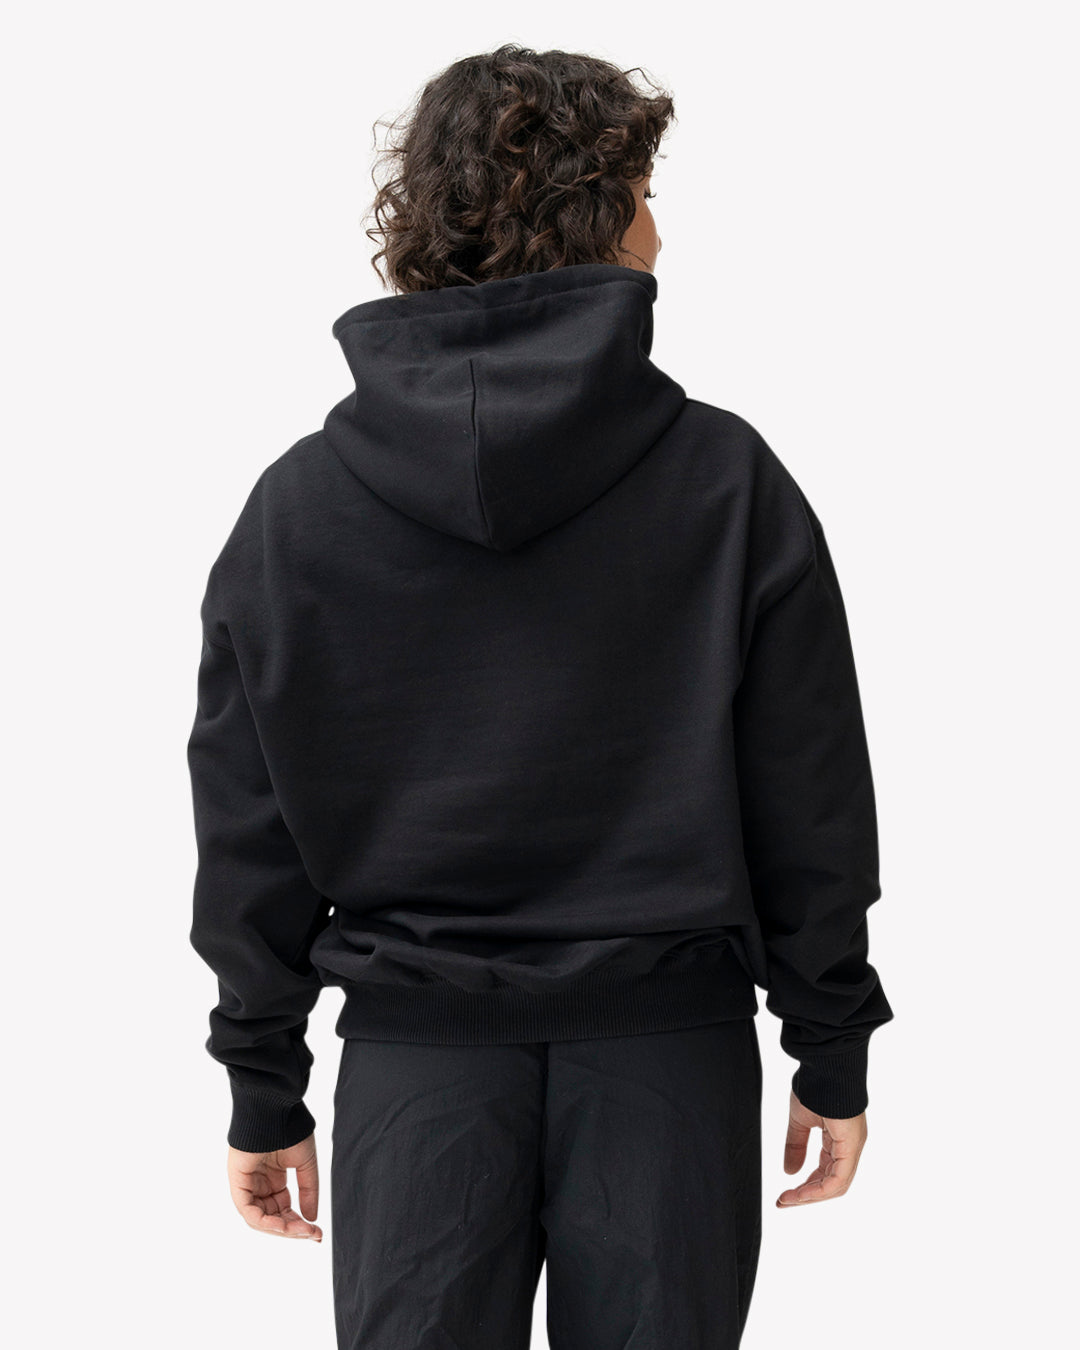 Destroyed Classics Hoodie Black | Customized Culture